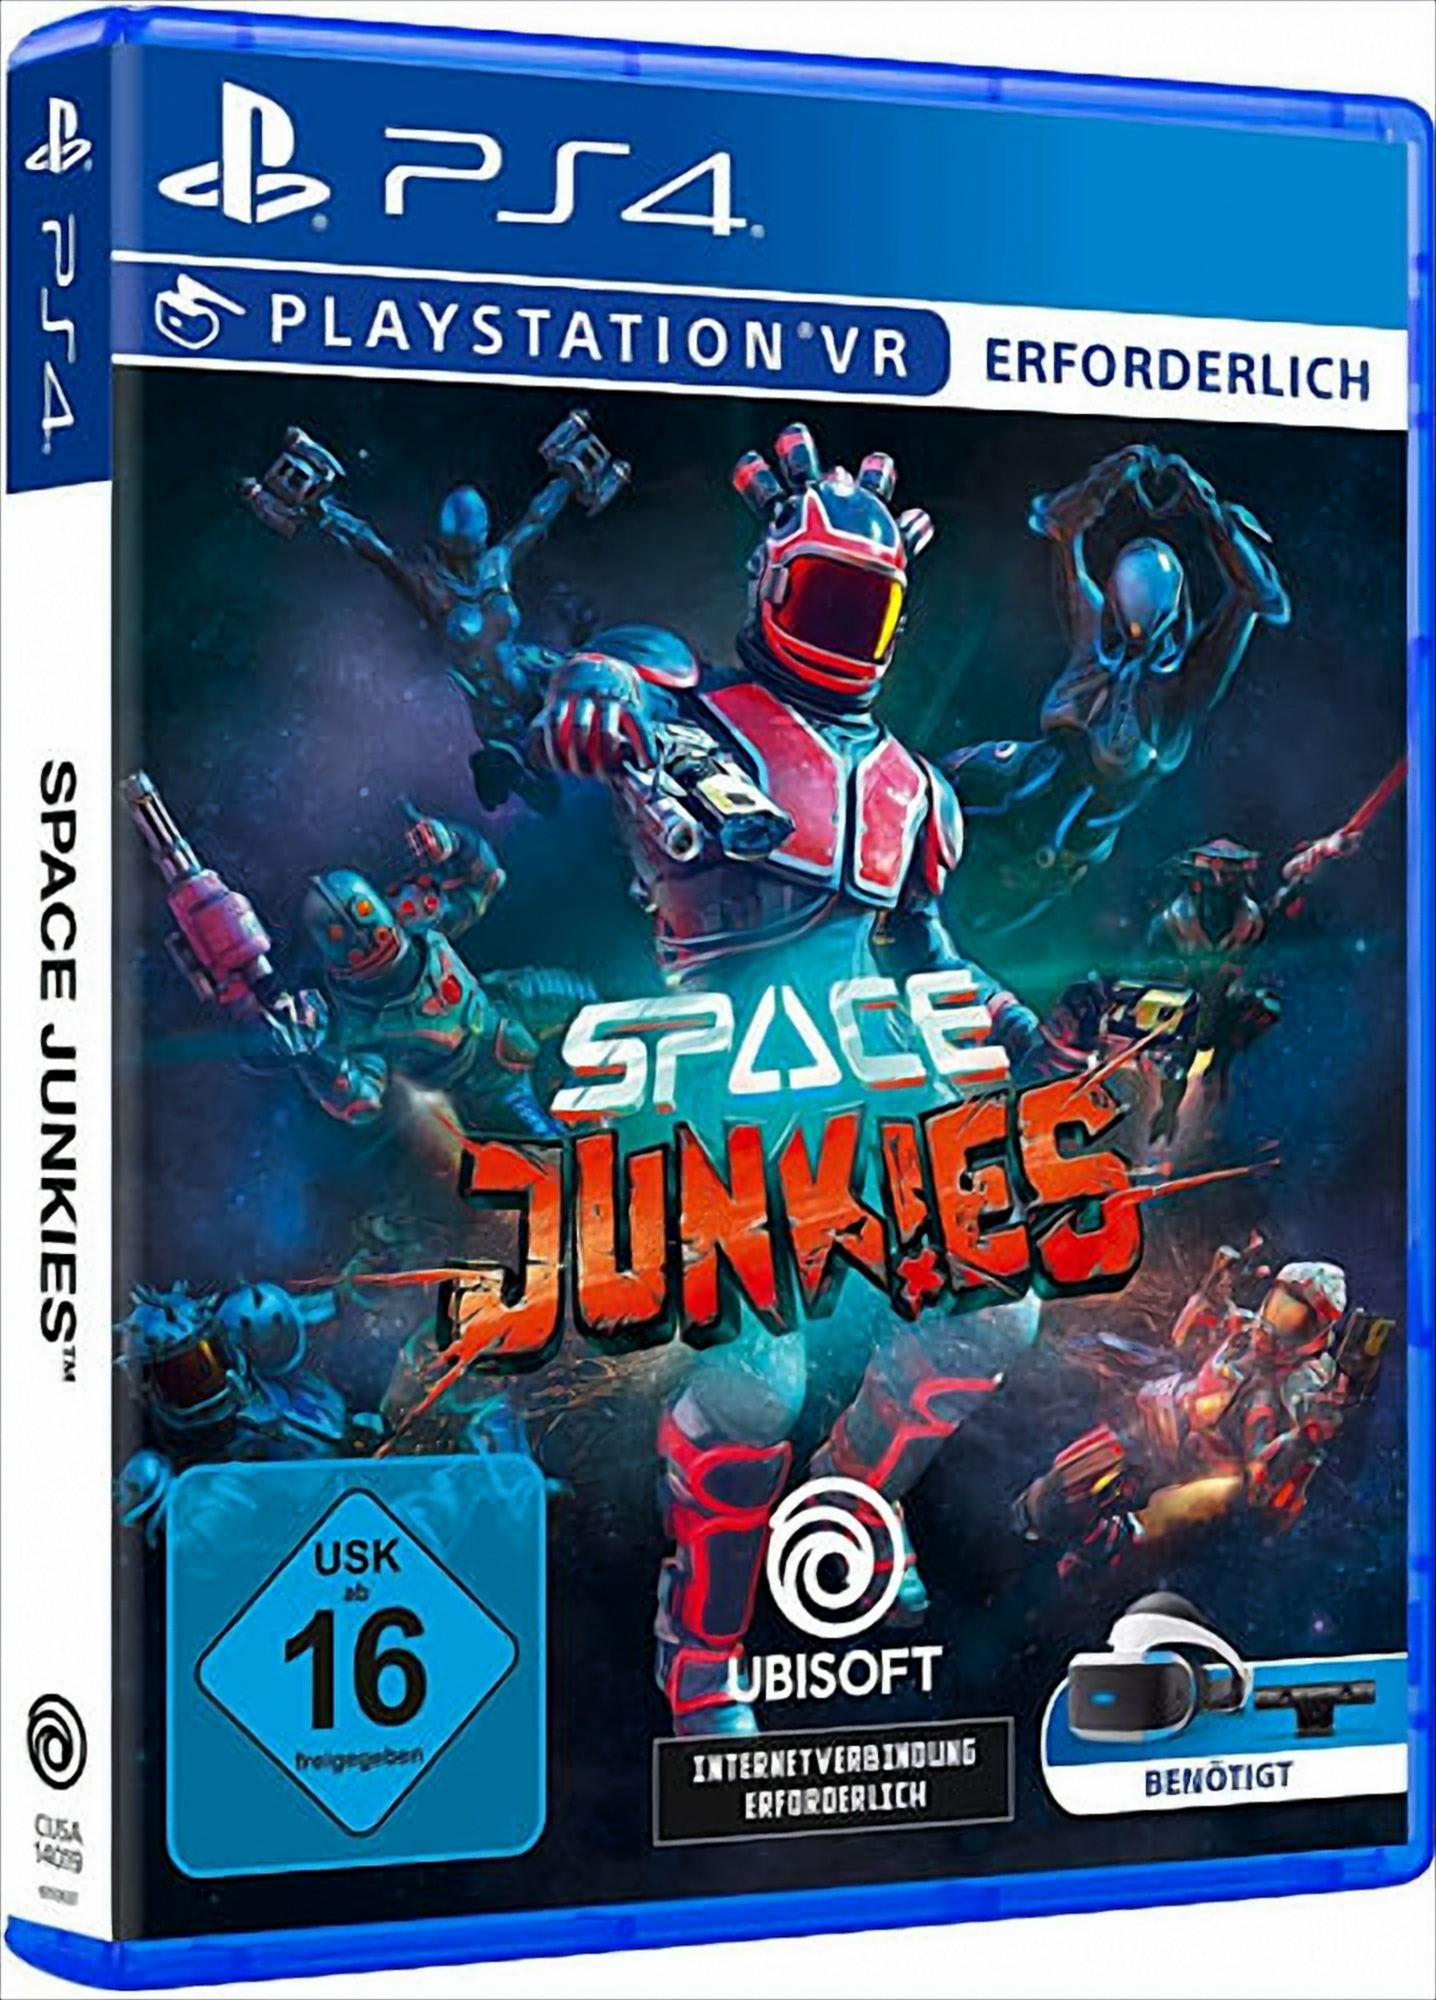 Space Junkies PS4 Only!) - 4] (VR [PlayStation